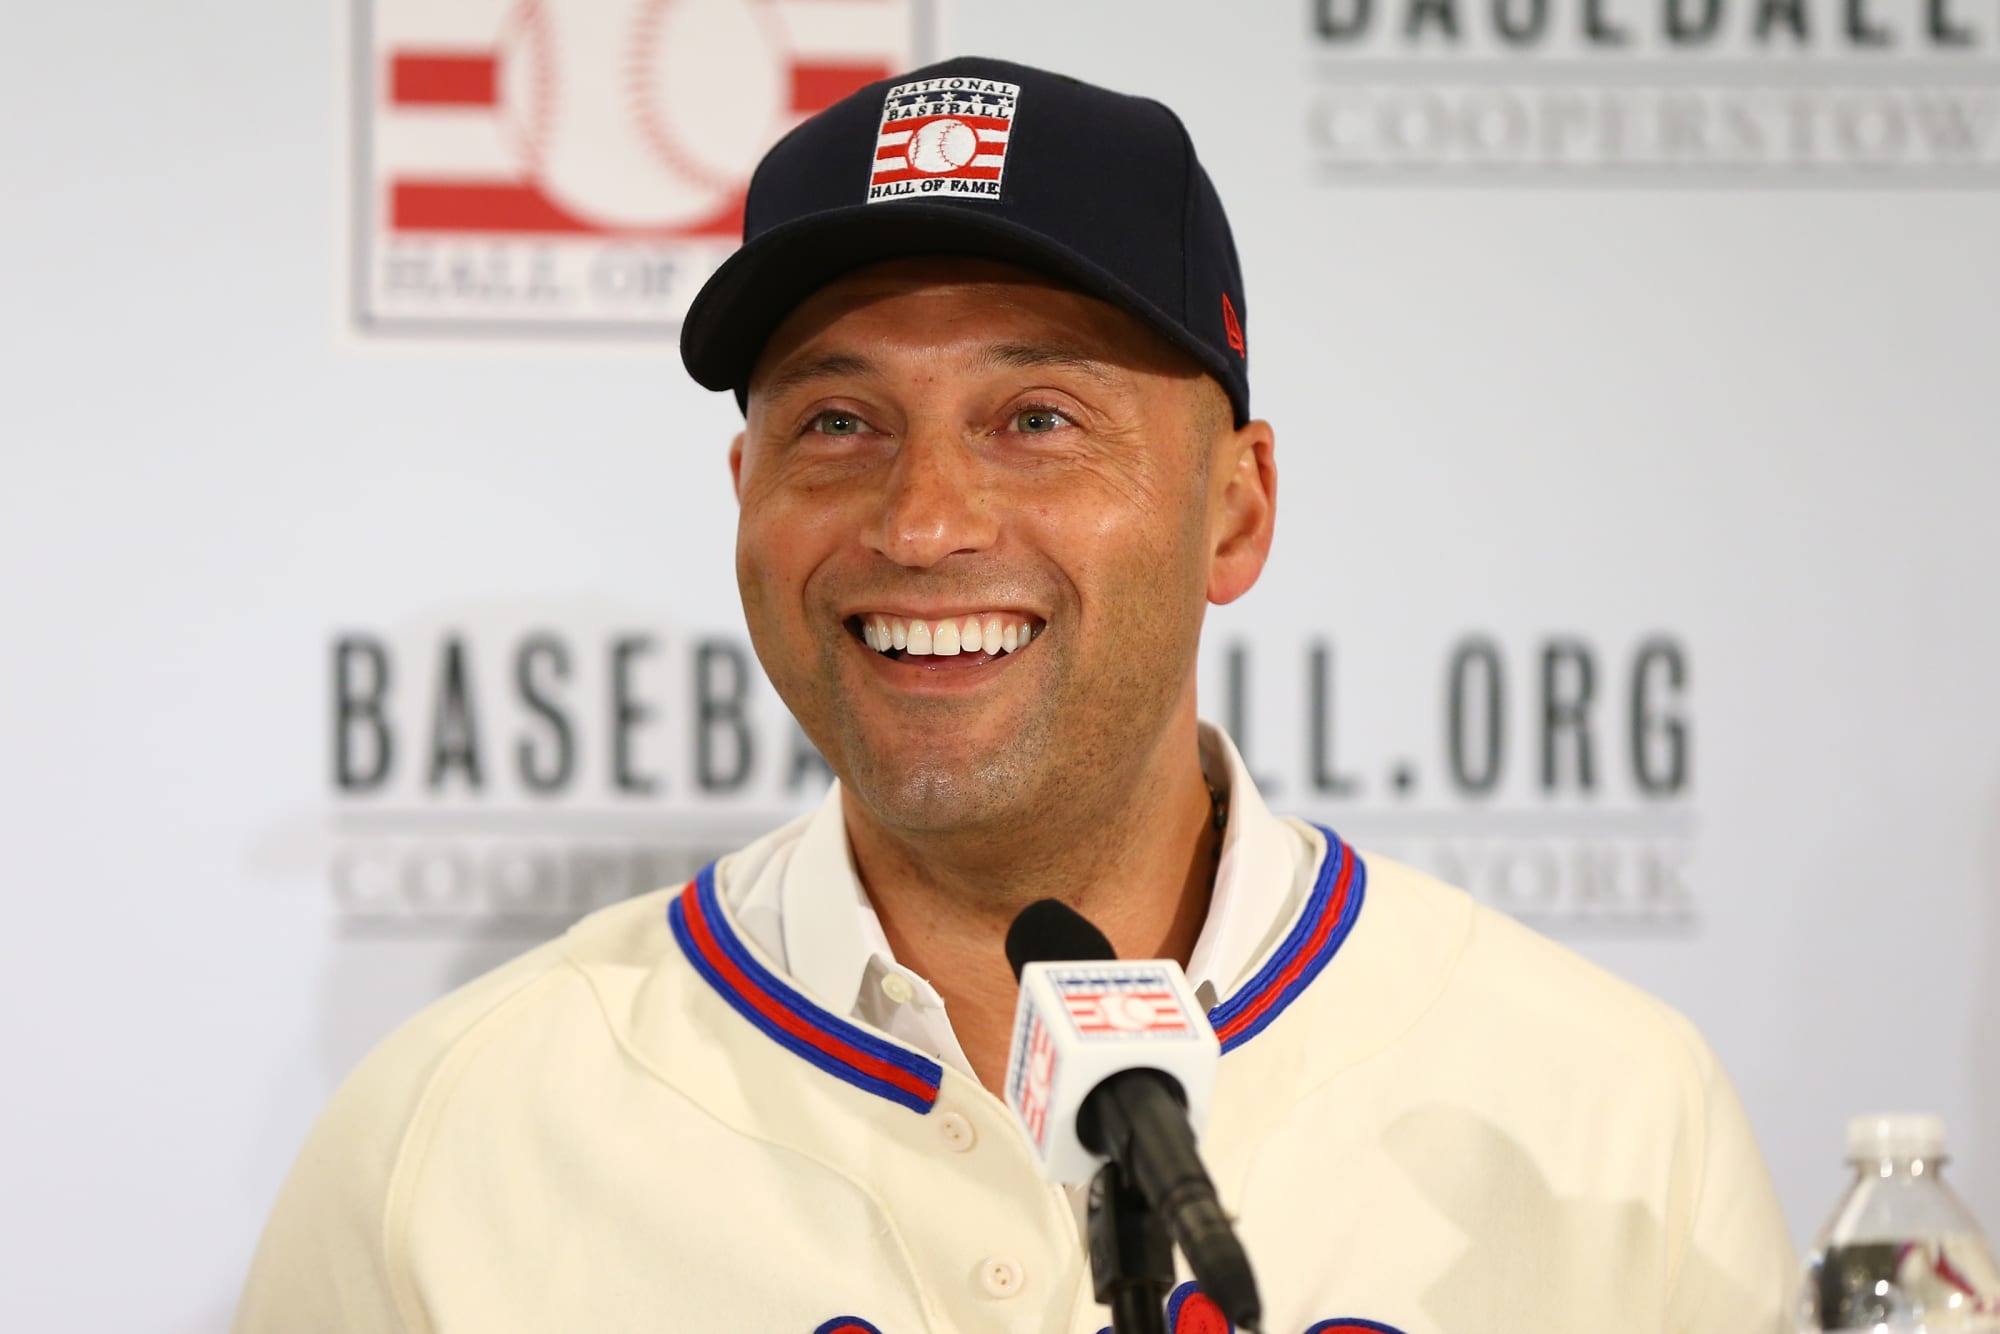 Is Derek Jeter overrated? Actually, he might be underrated.